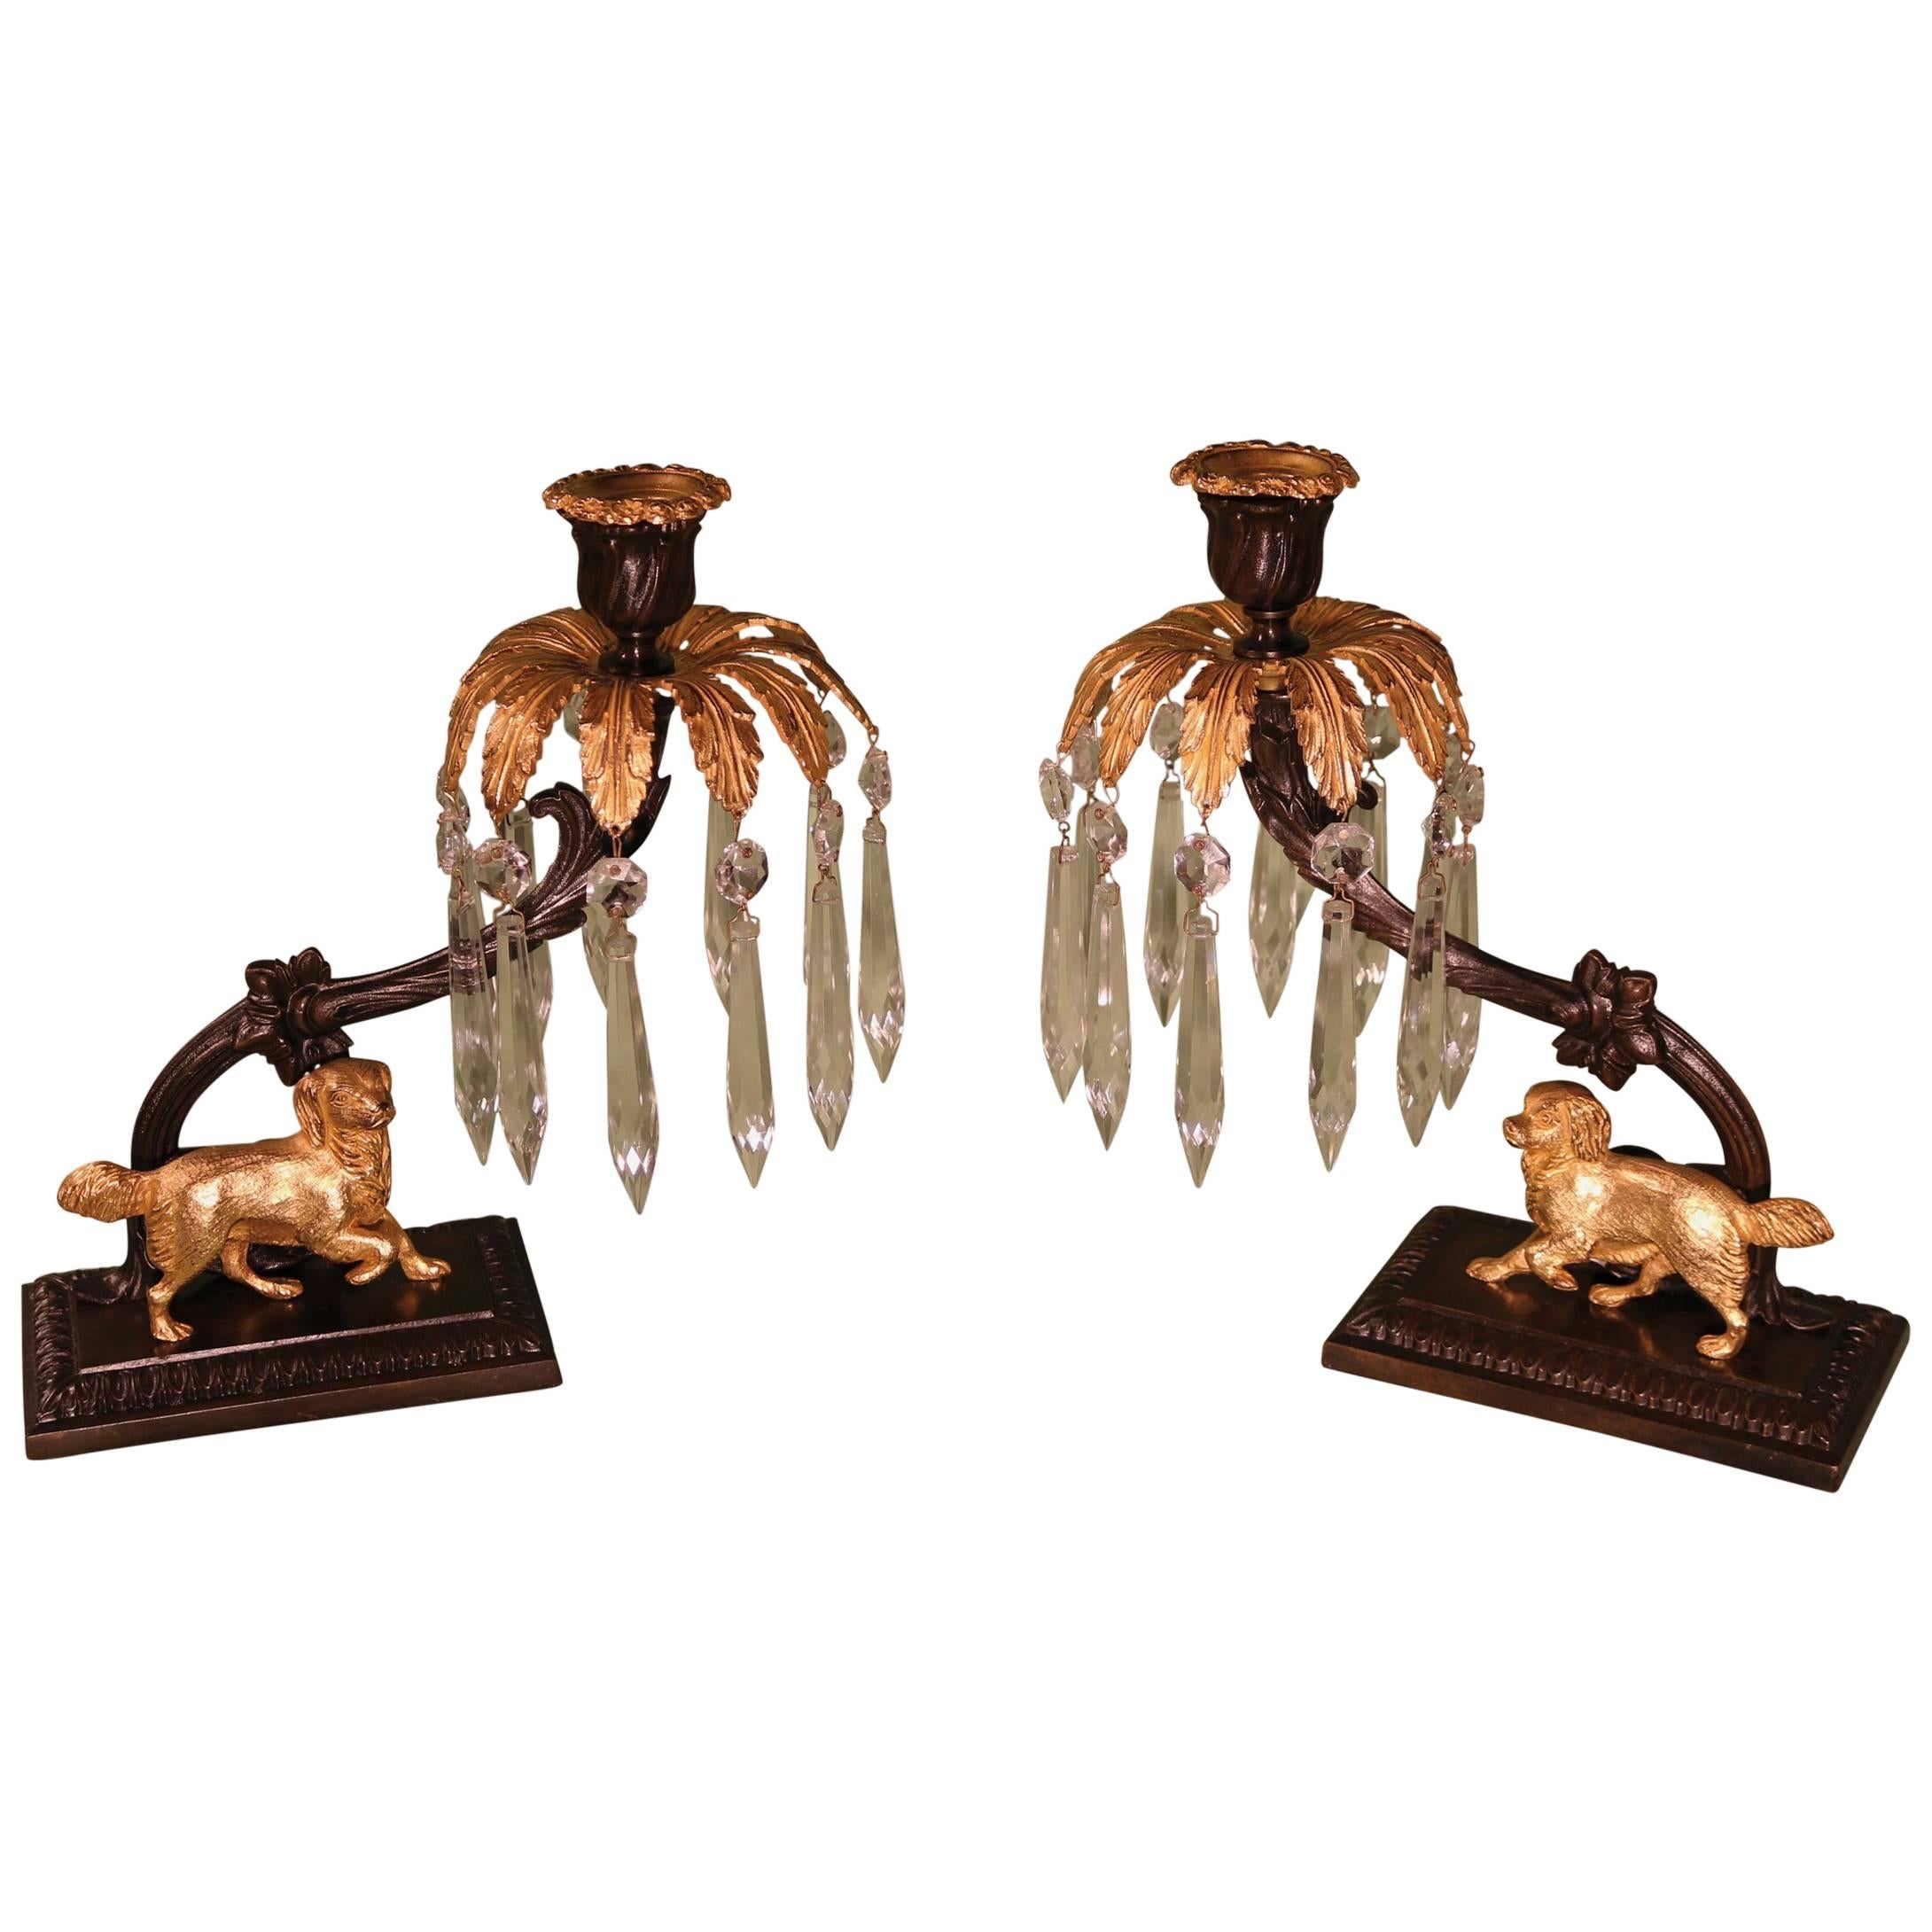 19th Century bronze and ormolu lustre candlesticks with dogs